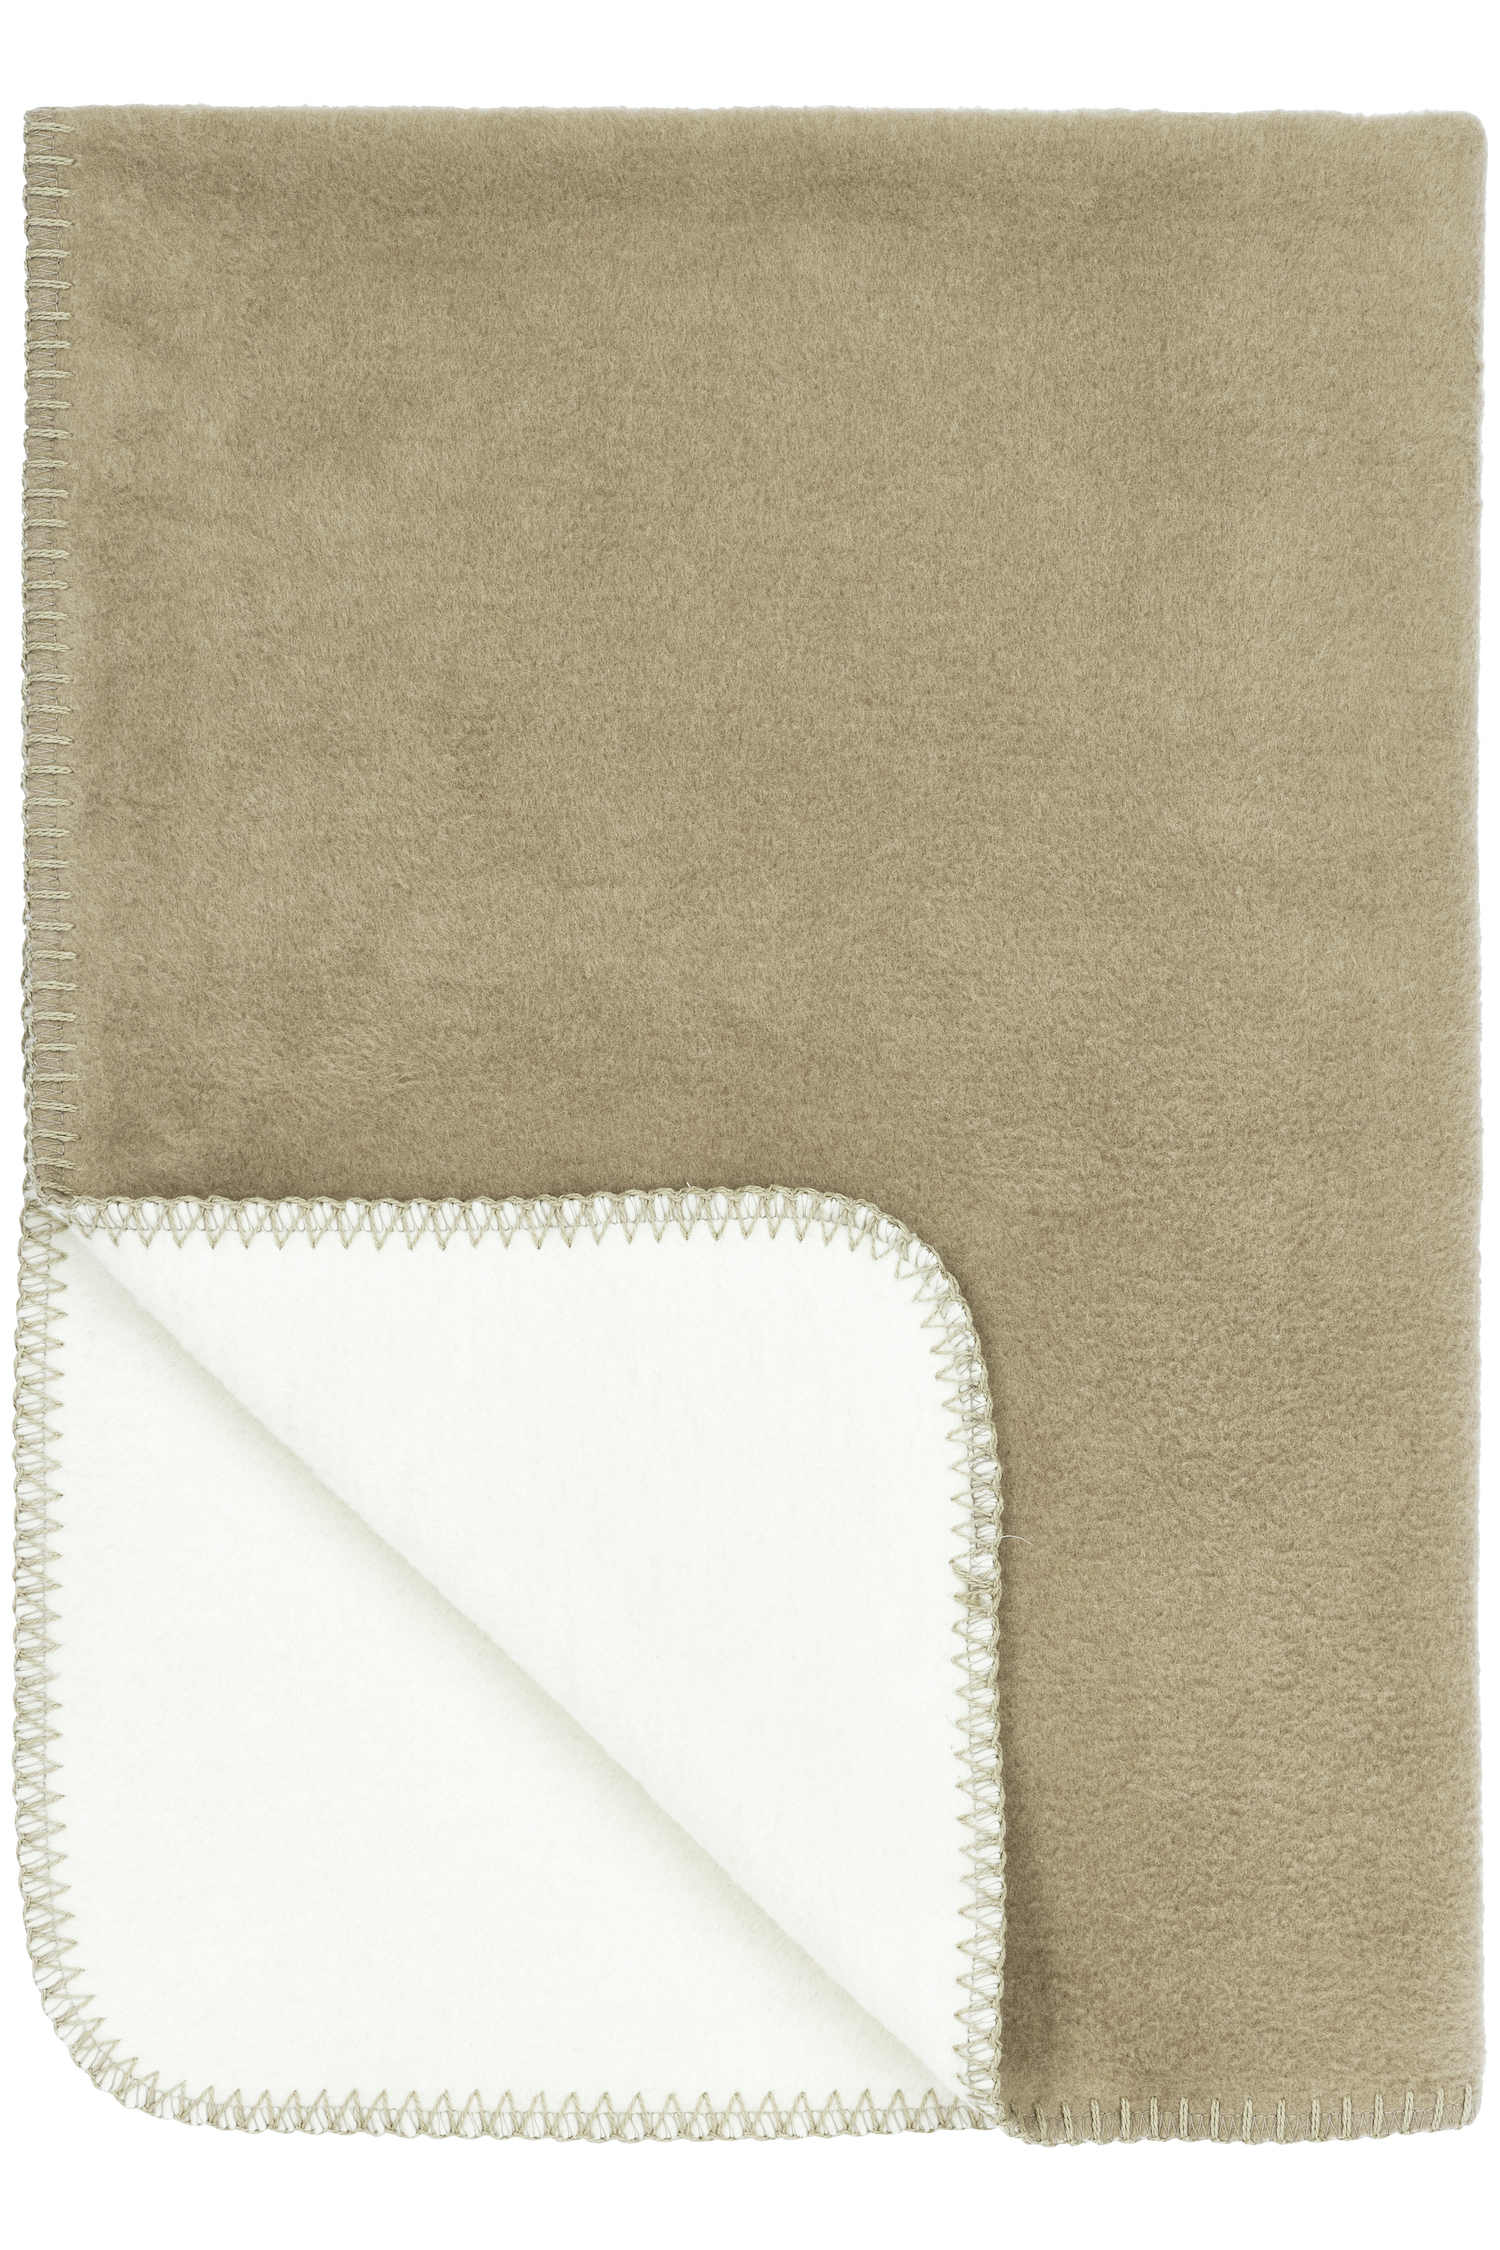 Wiegdeken Double Face - Taupe/Offwhite - 75x100cm